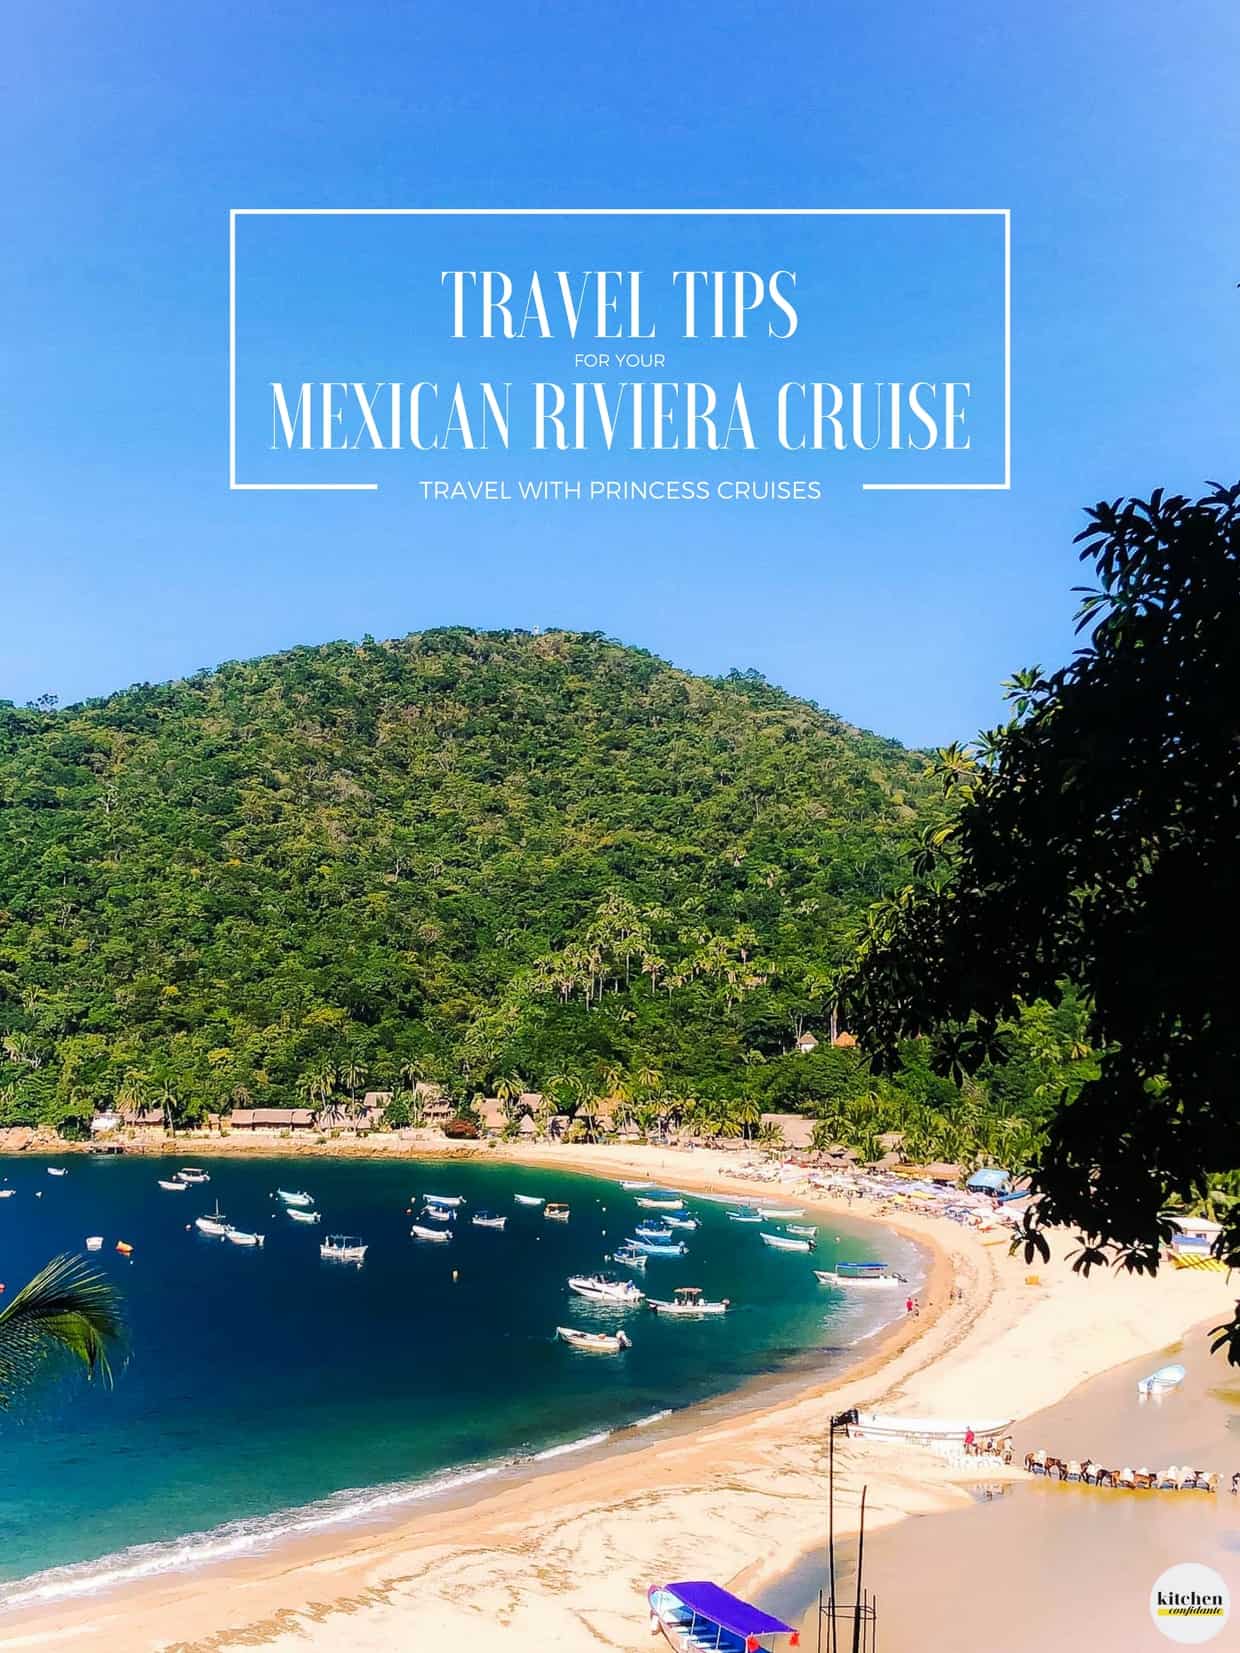 Find out all my travel tips for your Mexican Riviera Cruise with @PrincessCruises! Check out life on board, dining, excursions and more! #ad #comebacknew #travel #cruise #cruising #rubyprincess #princesscruises #vacation #travelguide #foodietravel